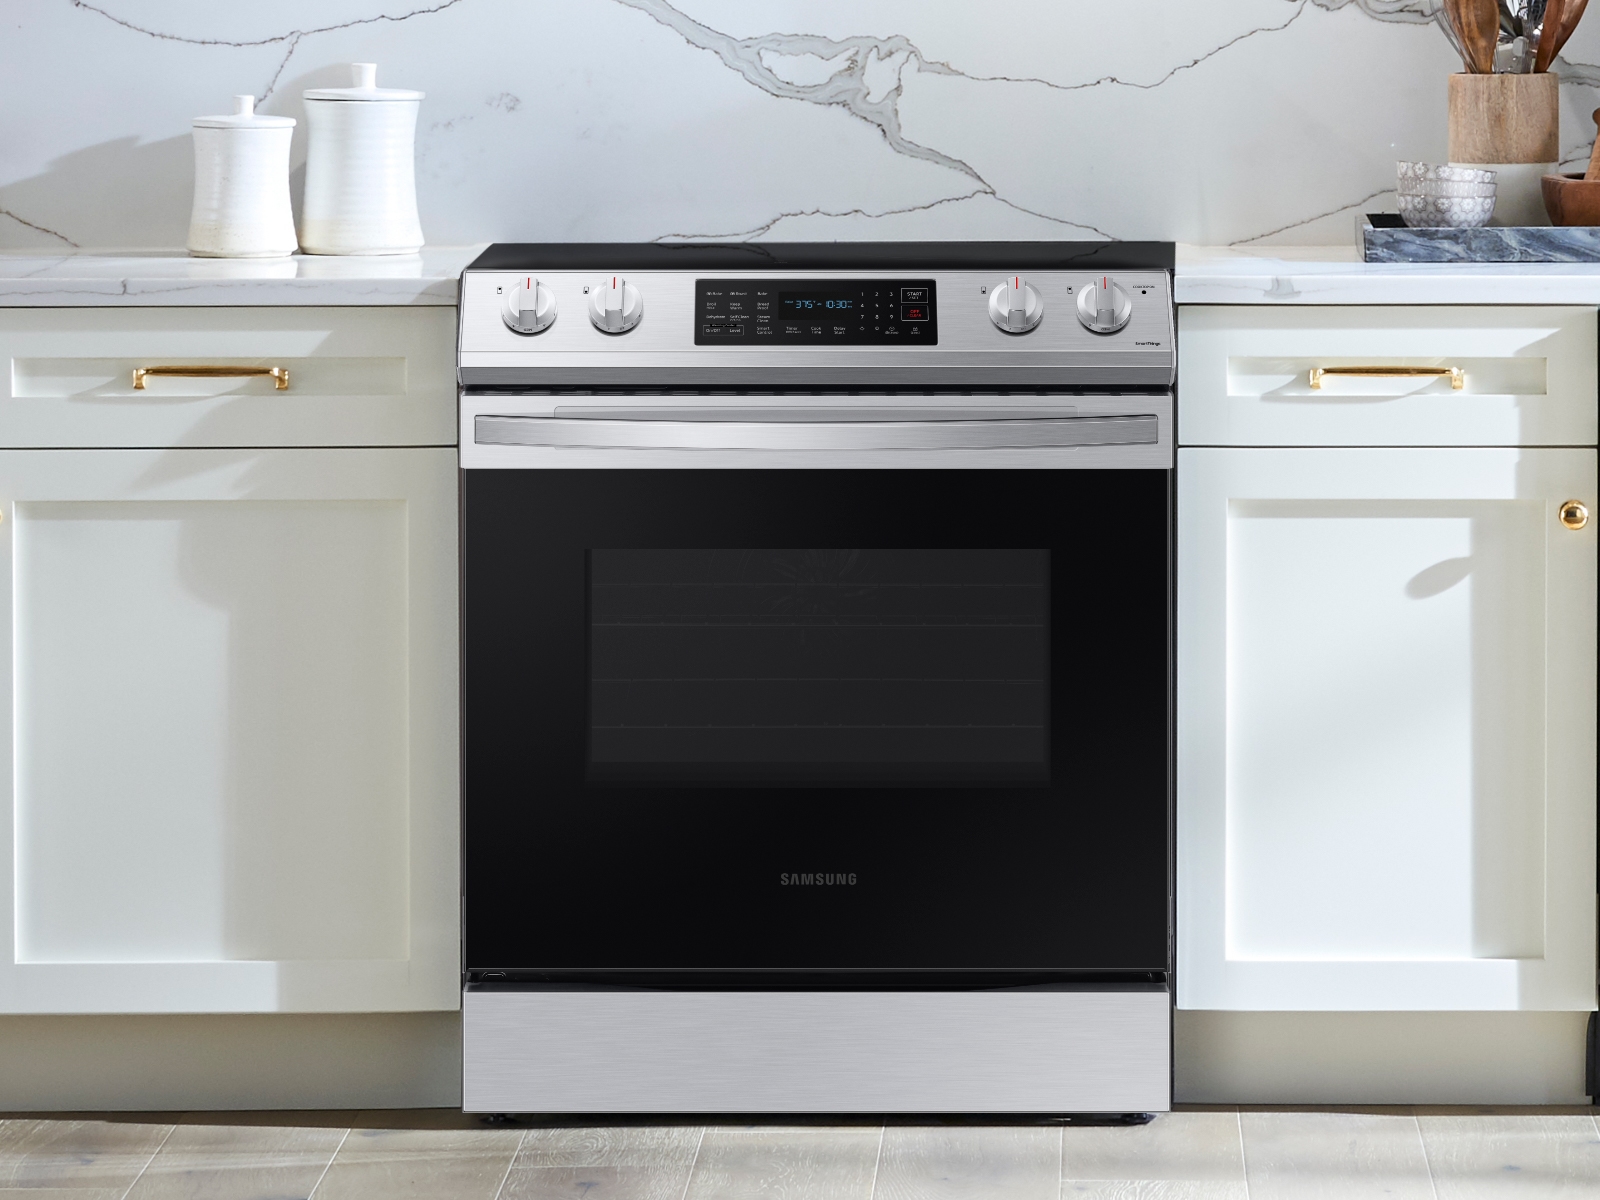 Samsung - Electric Ranges - Ranges - The Home Depot